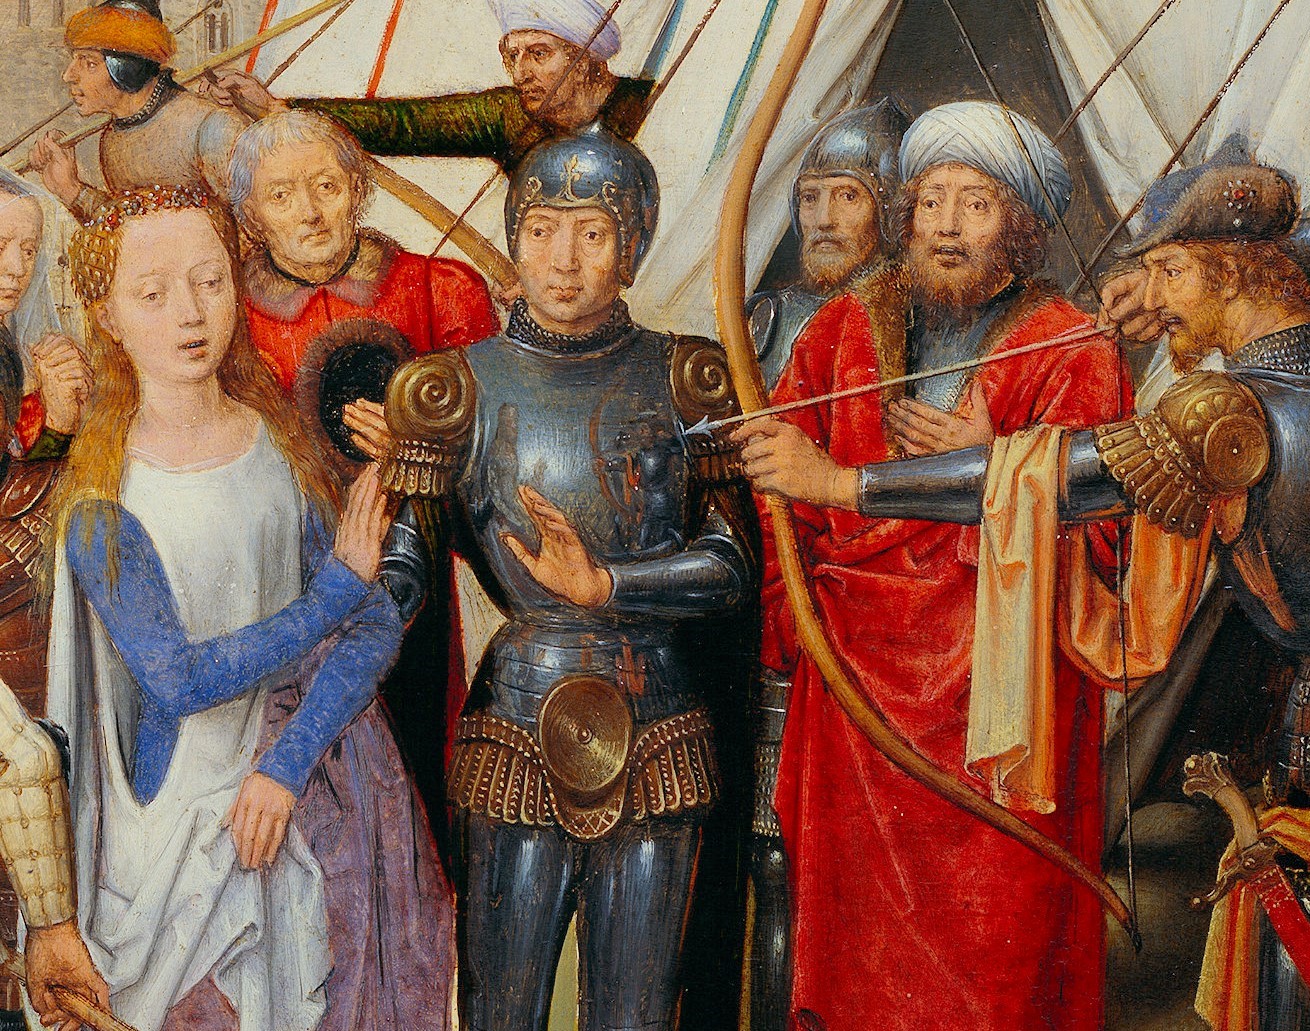 Martyrdom of the Saint Ursula, by Hans Memling